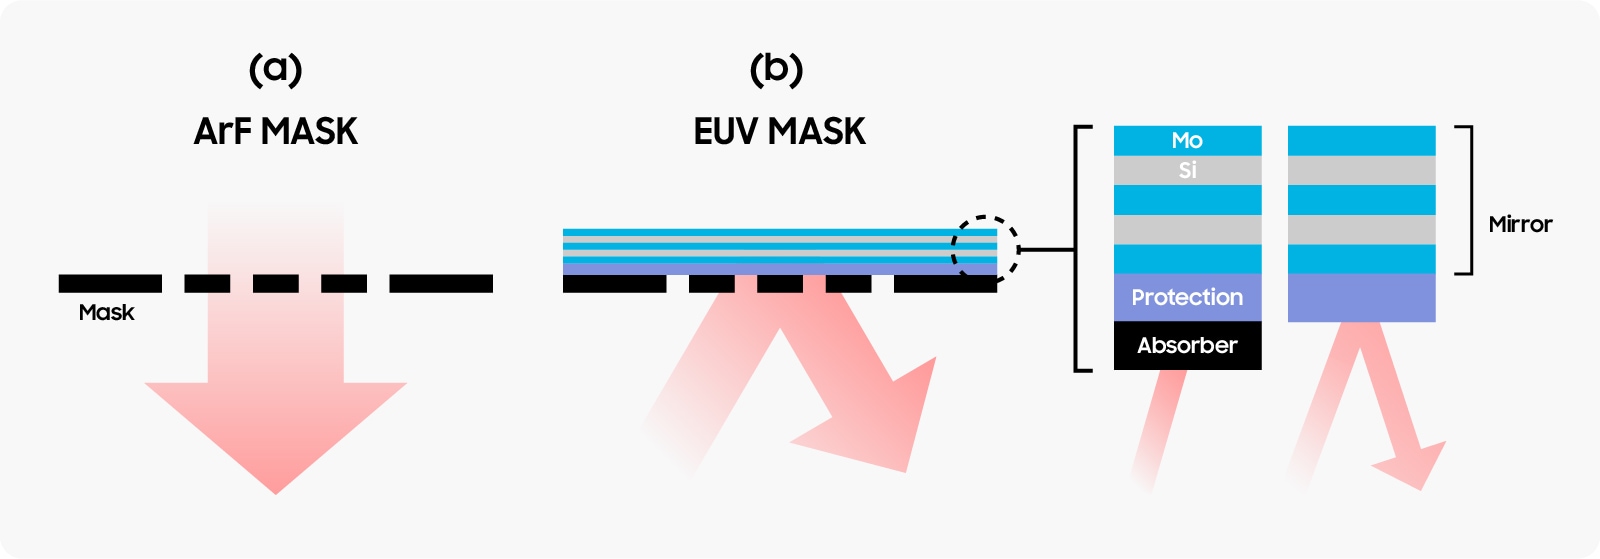 Figure [6]. To minimize light absorption in an EUV mask, a reflecting mirror made up of multiple layers of Mo (Molybdenum) and Si (Silicon) is used. This mirror is protected by means of a protection layer, which serves as a protective film. In the areas where the EUV needs to be absorbed, an absorber (TaN) is used.